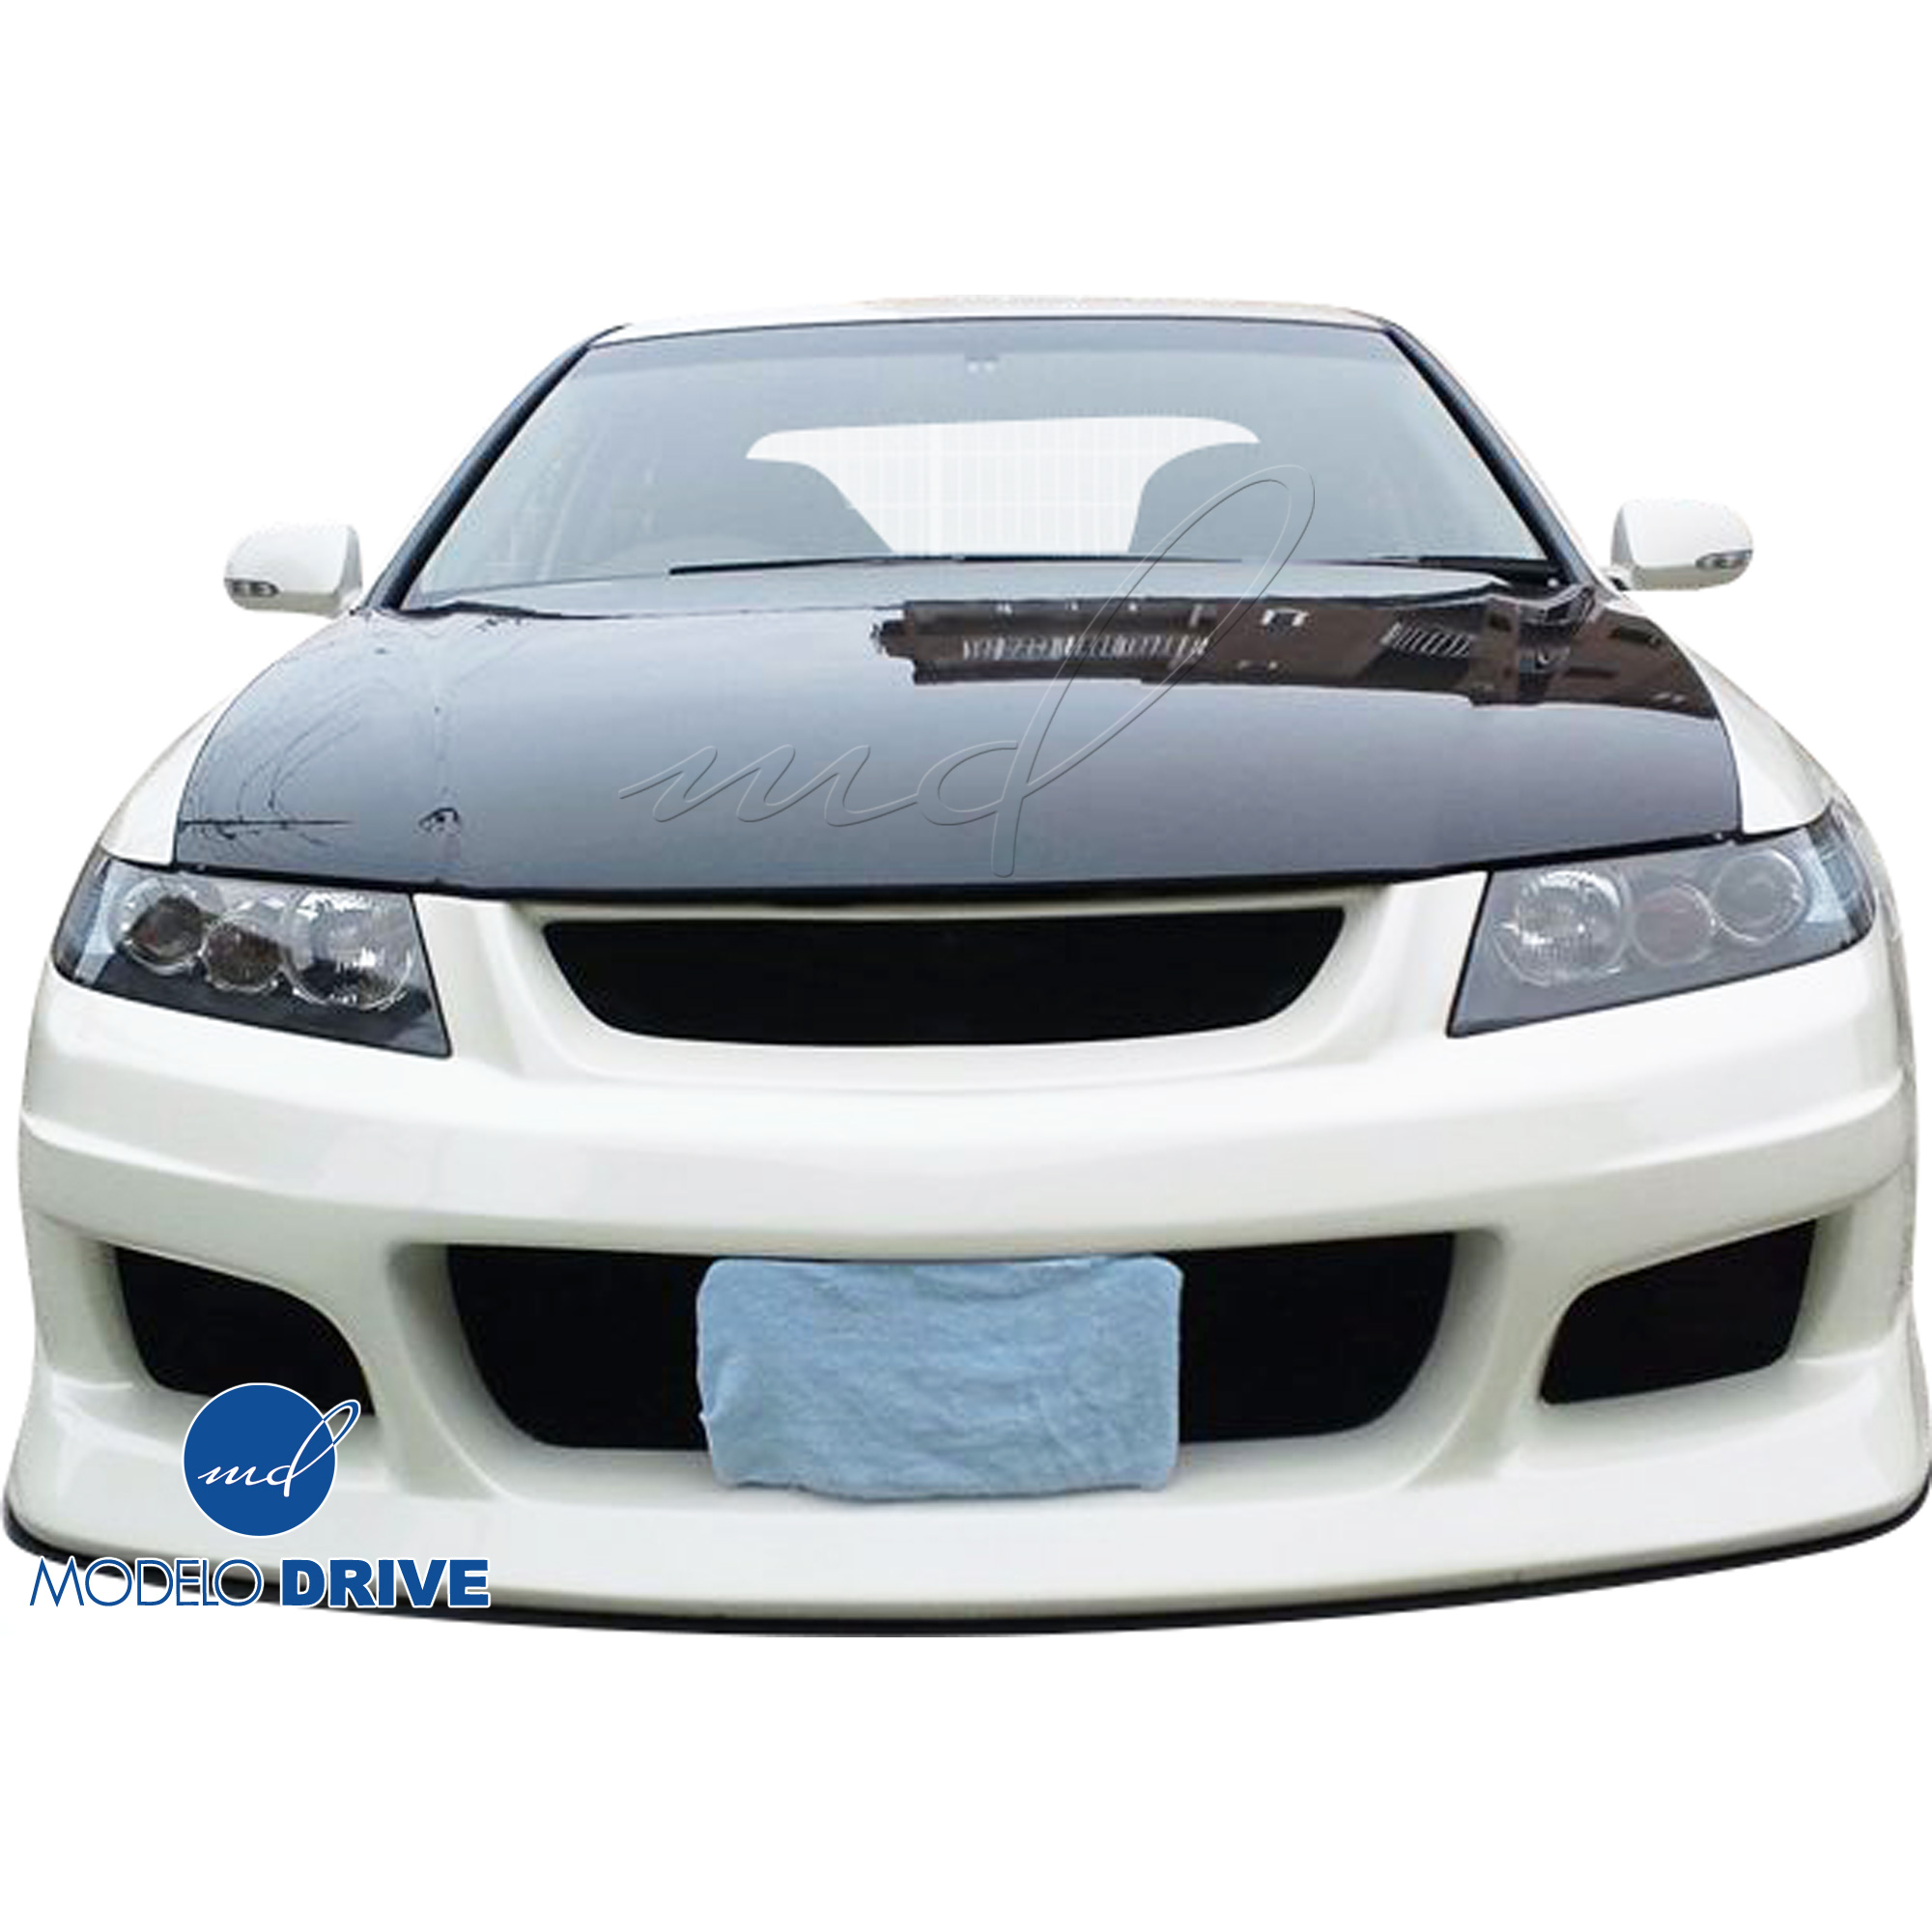 ModeloDrive FRP PHAS Front Bumper > Acura TSX CL9 2004-2008 - Image 4